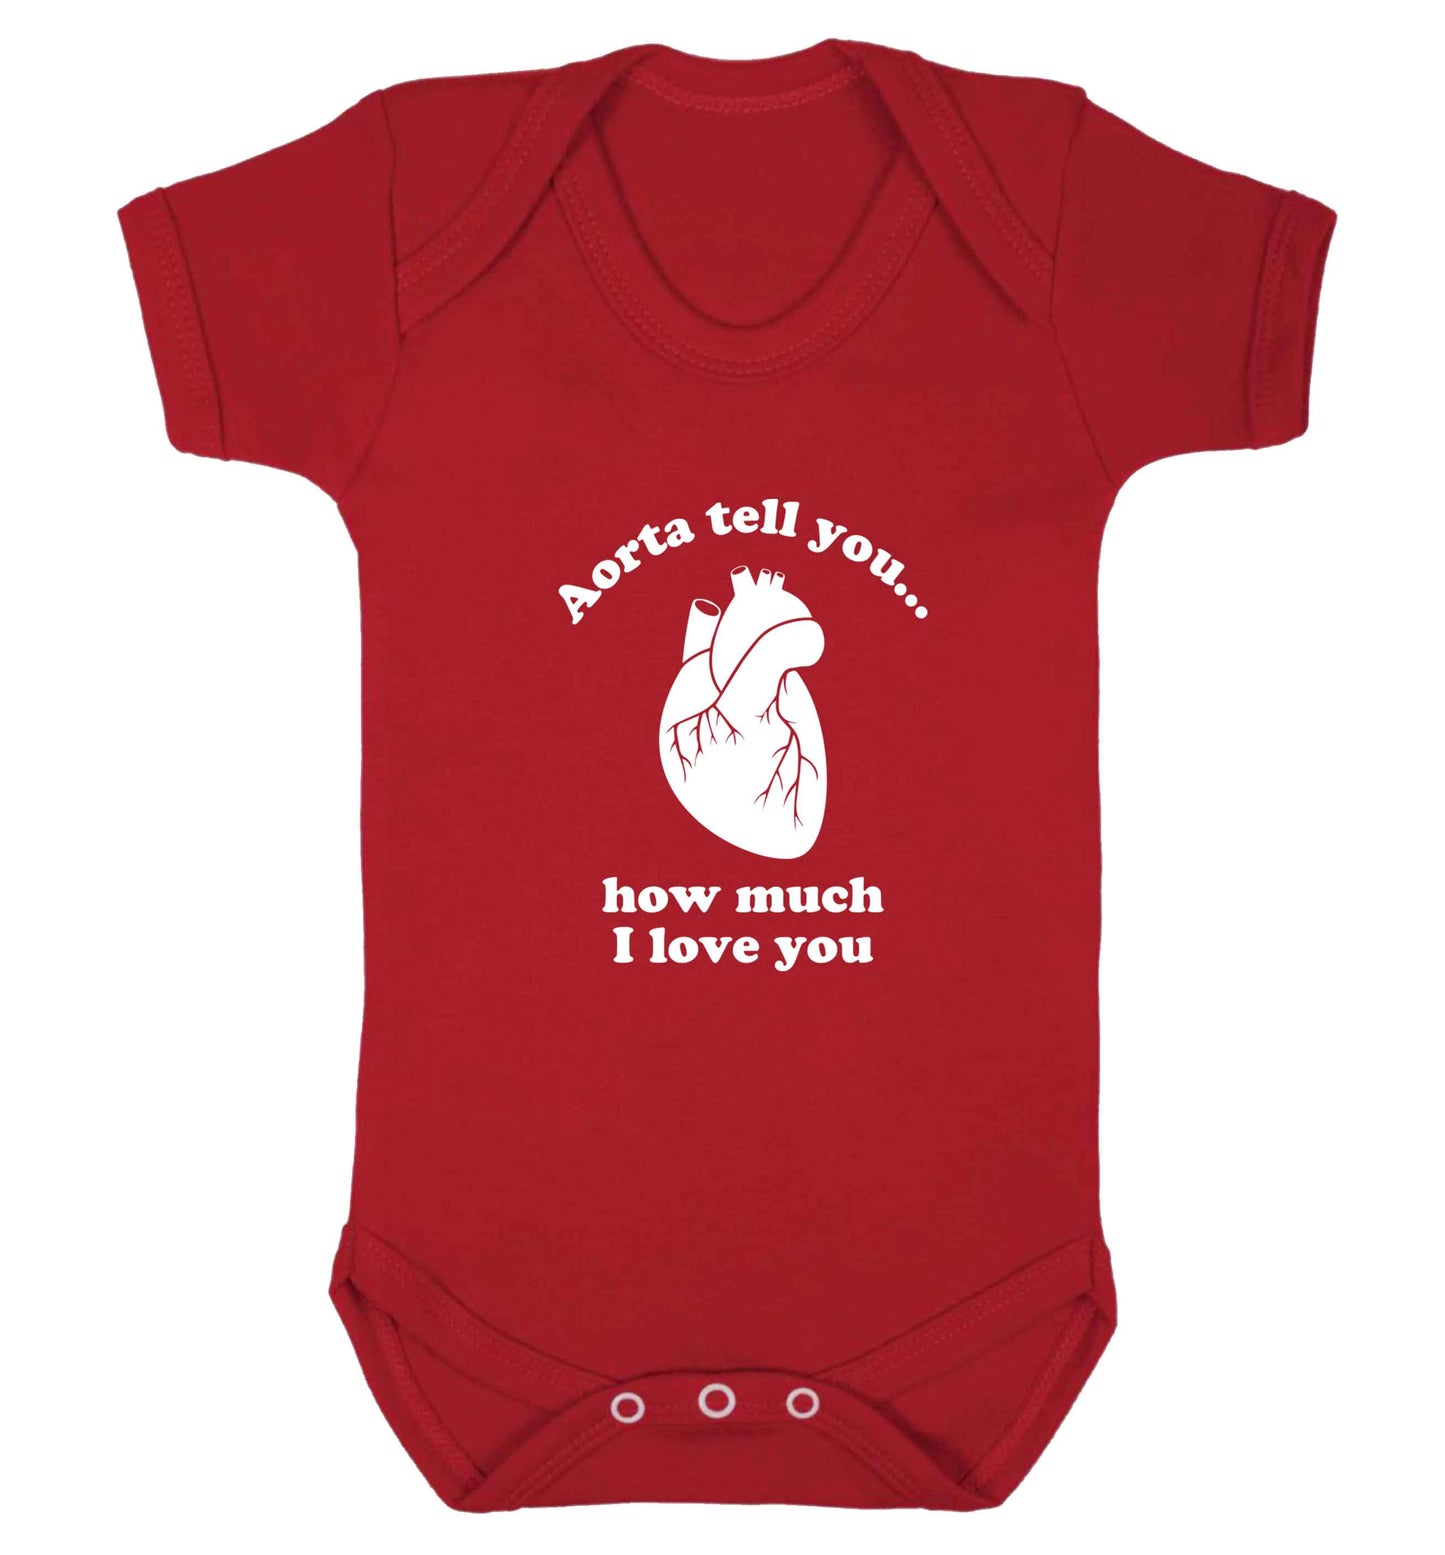 Aorta tell you how much I love you baby vest red 18-24 months